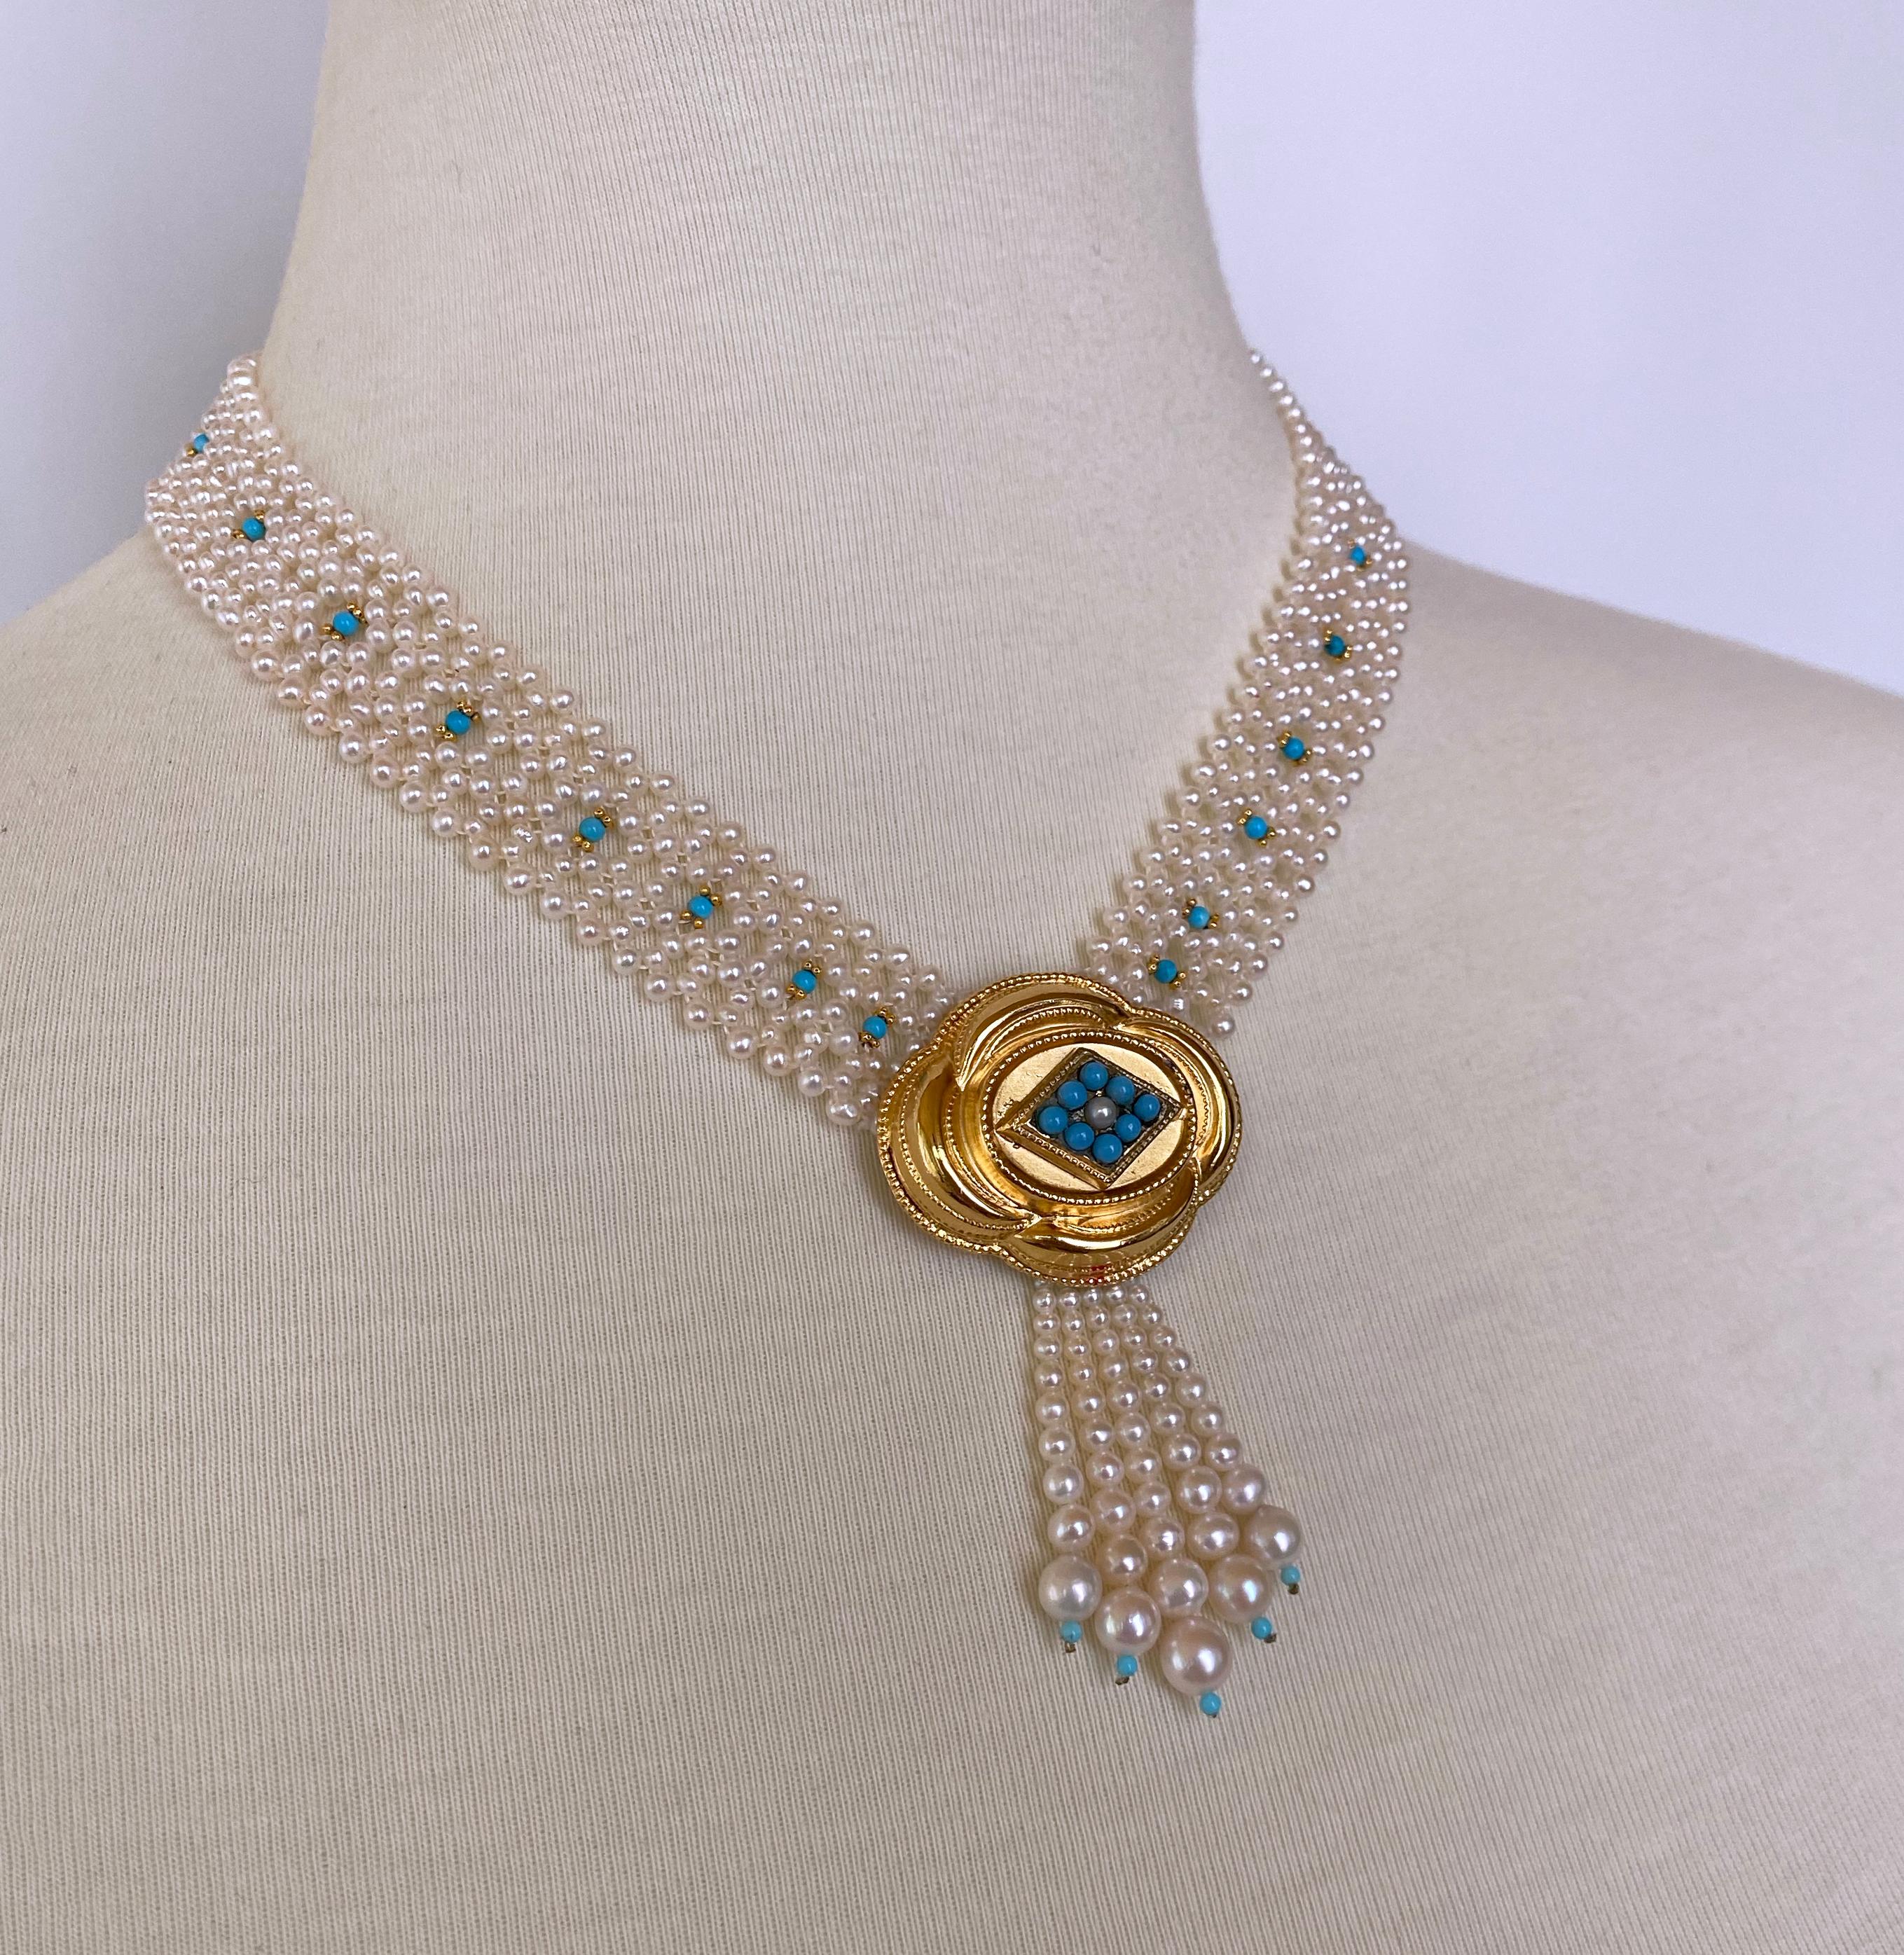 Artisan Marina J Woven Pearl and Turquoise Necklace with Vintage Centerpiece For Sale